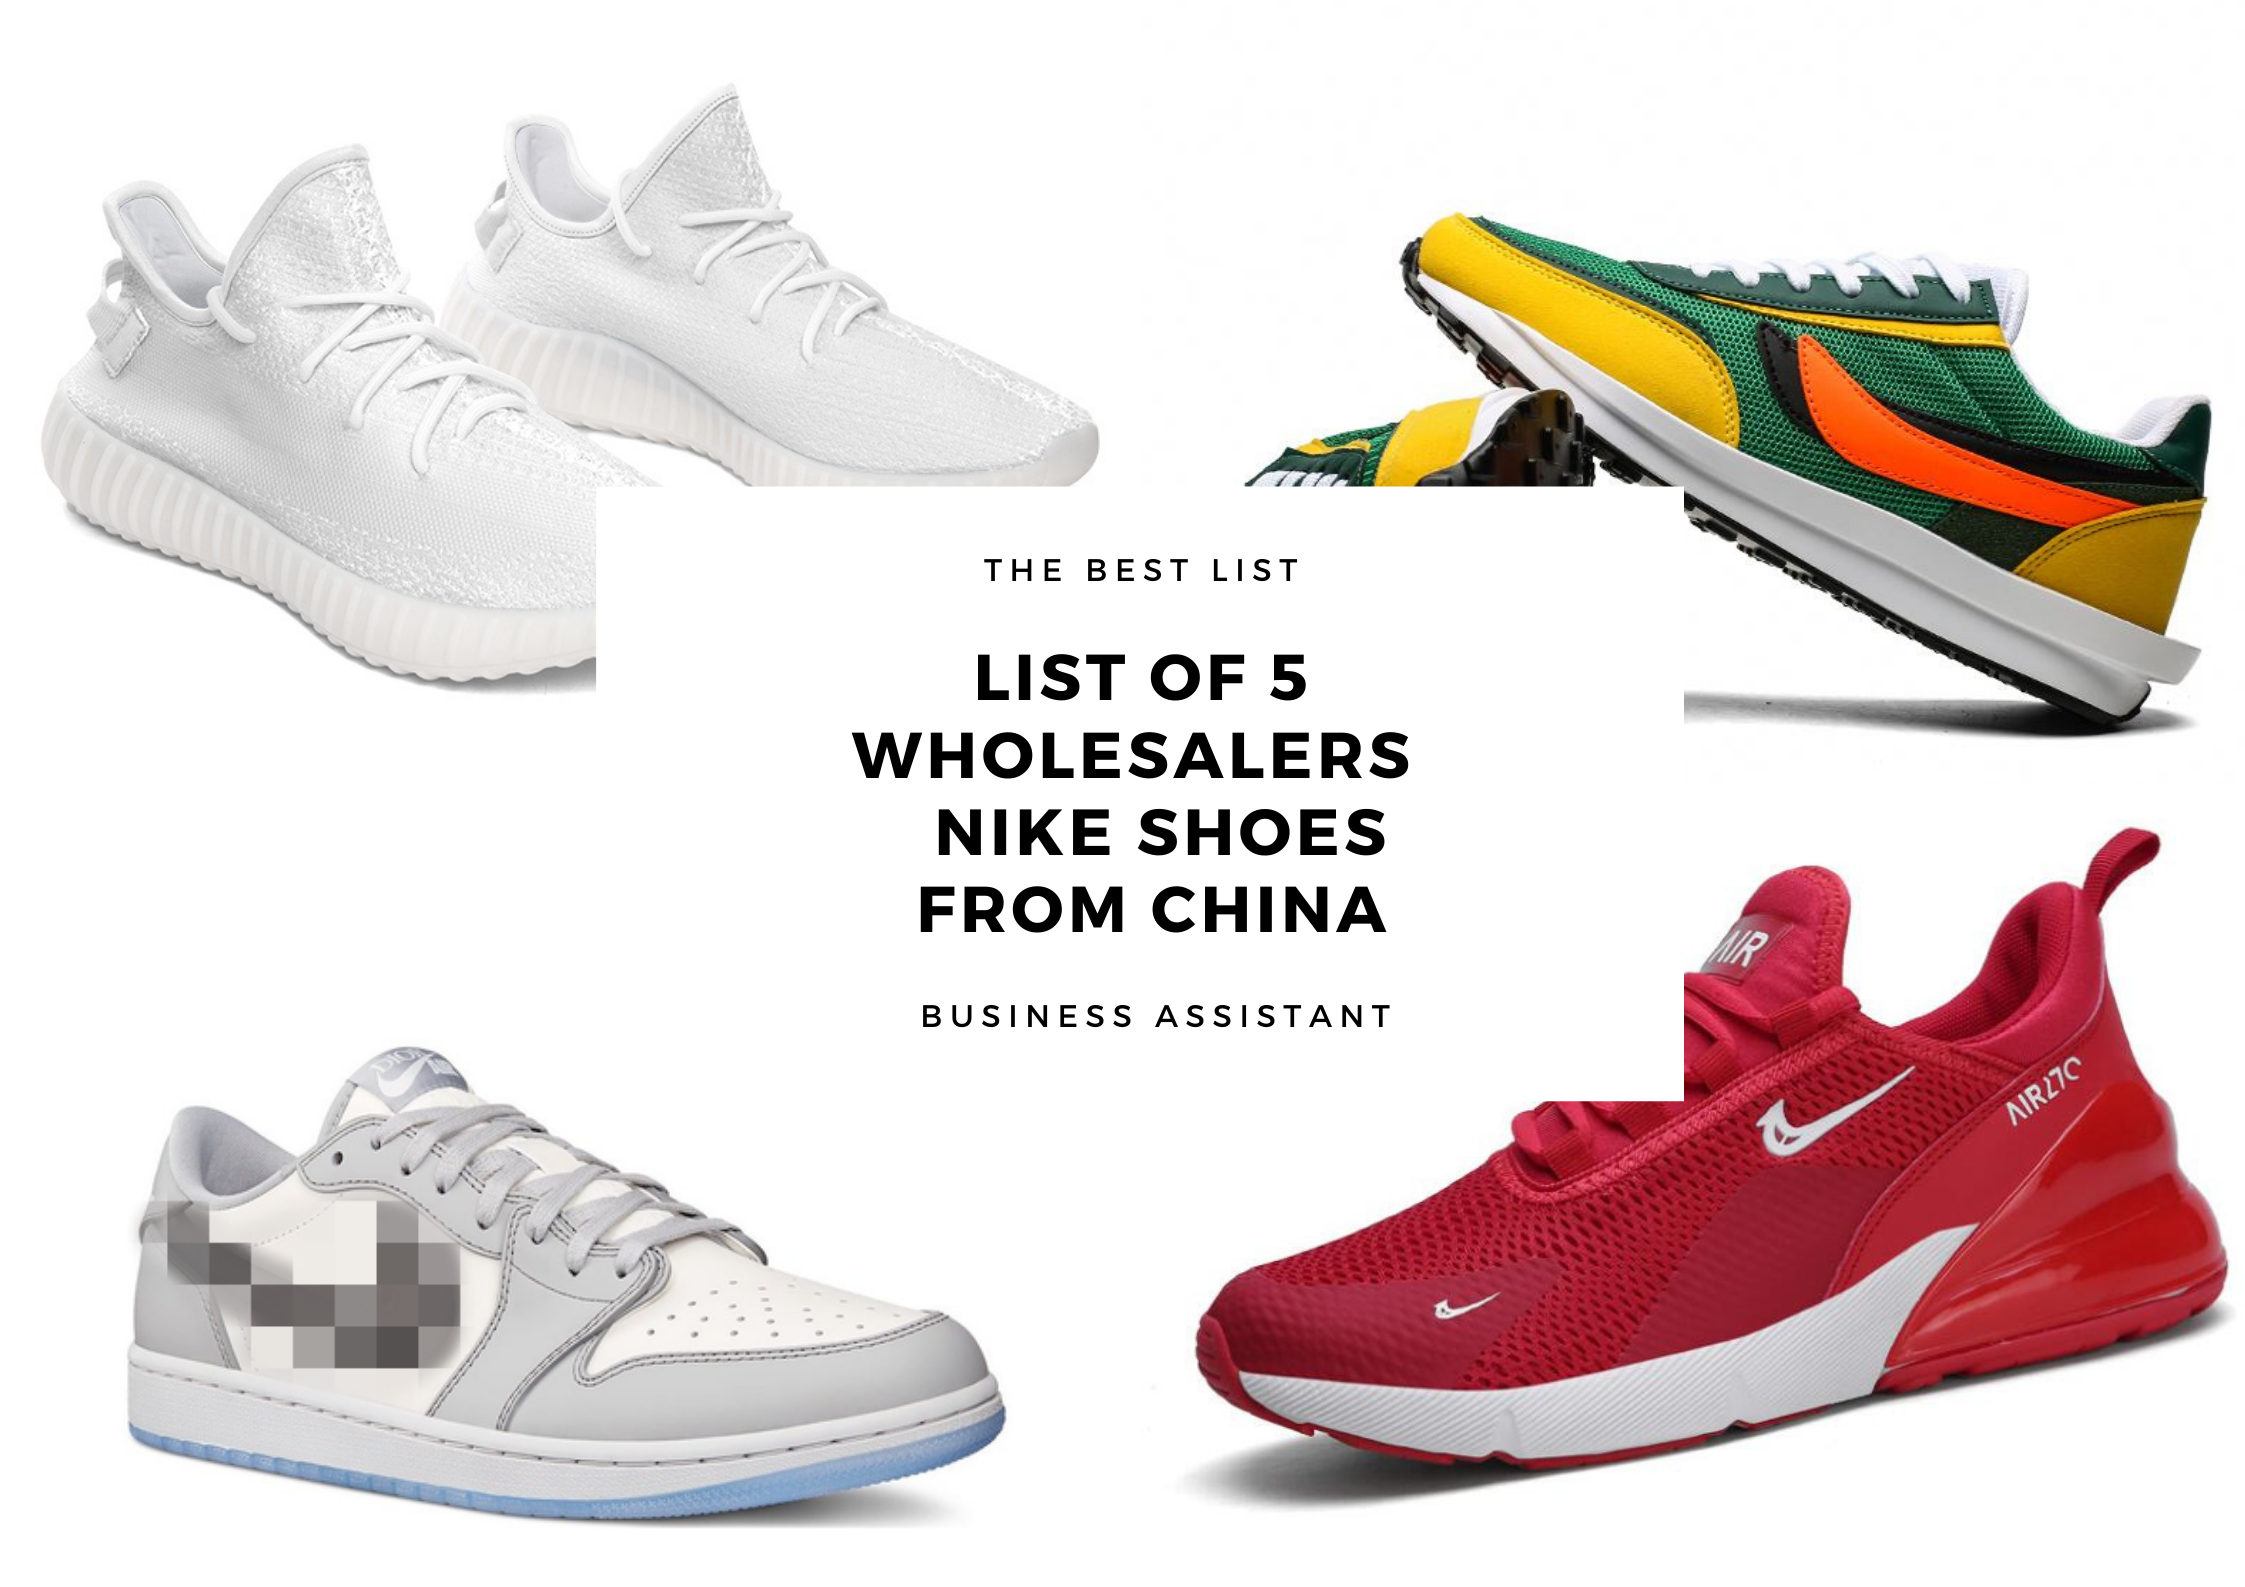 List of 5 NIKE Shoes wholesale/ suppliers /Vendor from China - Payhip